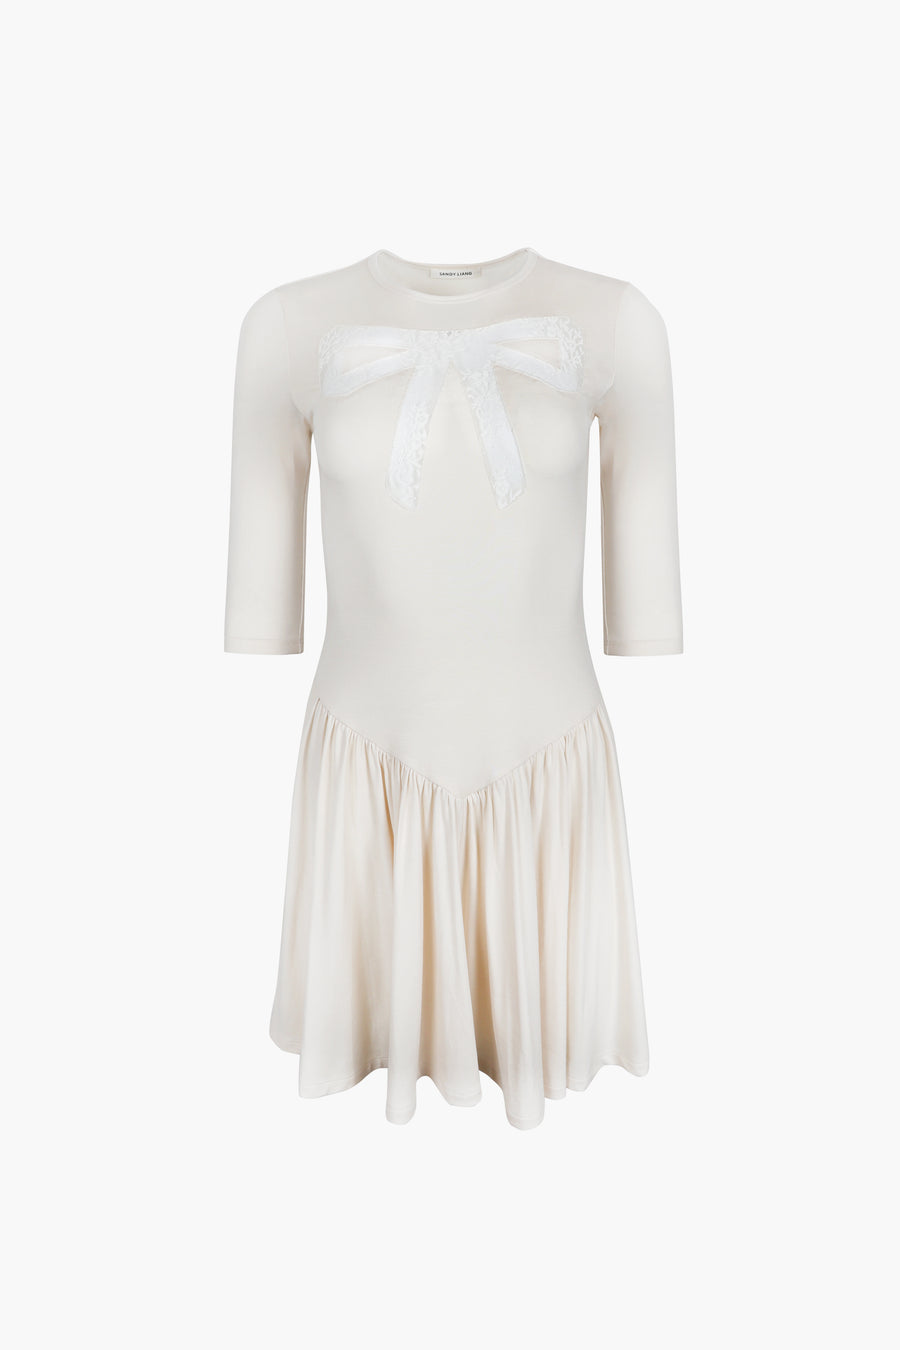 Mini dress in off white with lace cut out bow detail